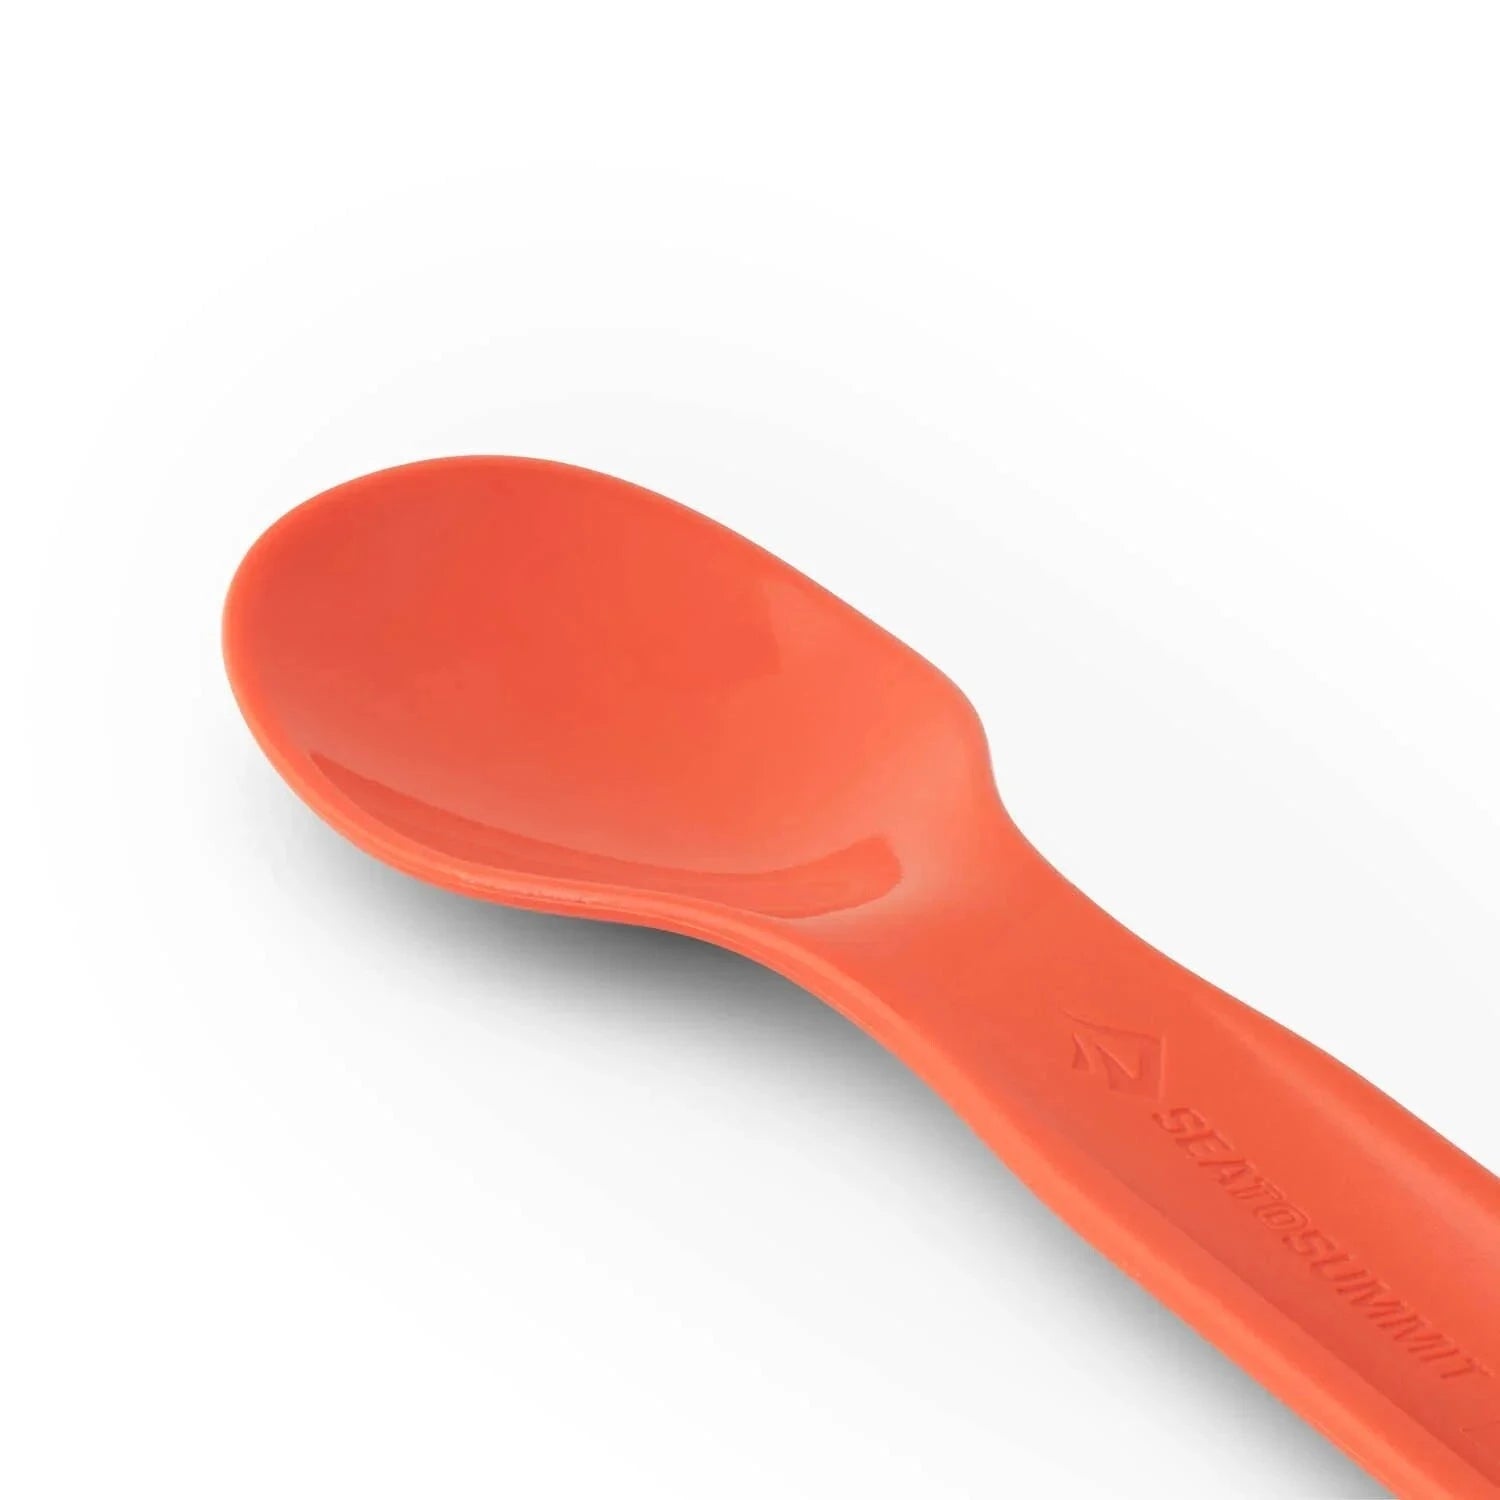 Sea to Summit Passage Cutlery Set, Spicy Orange, view of spoon